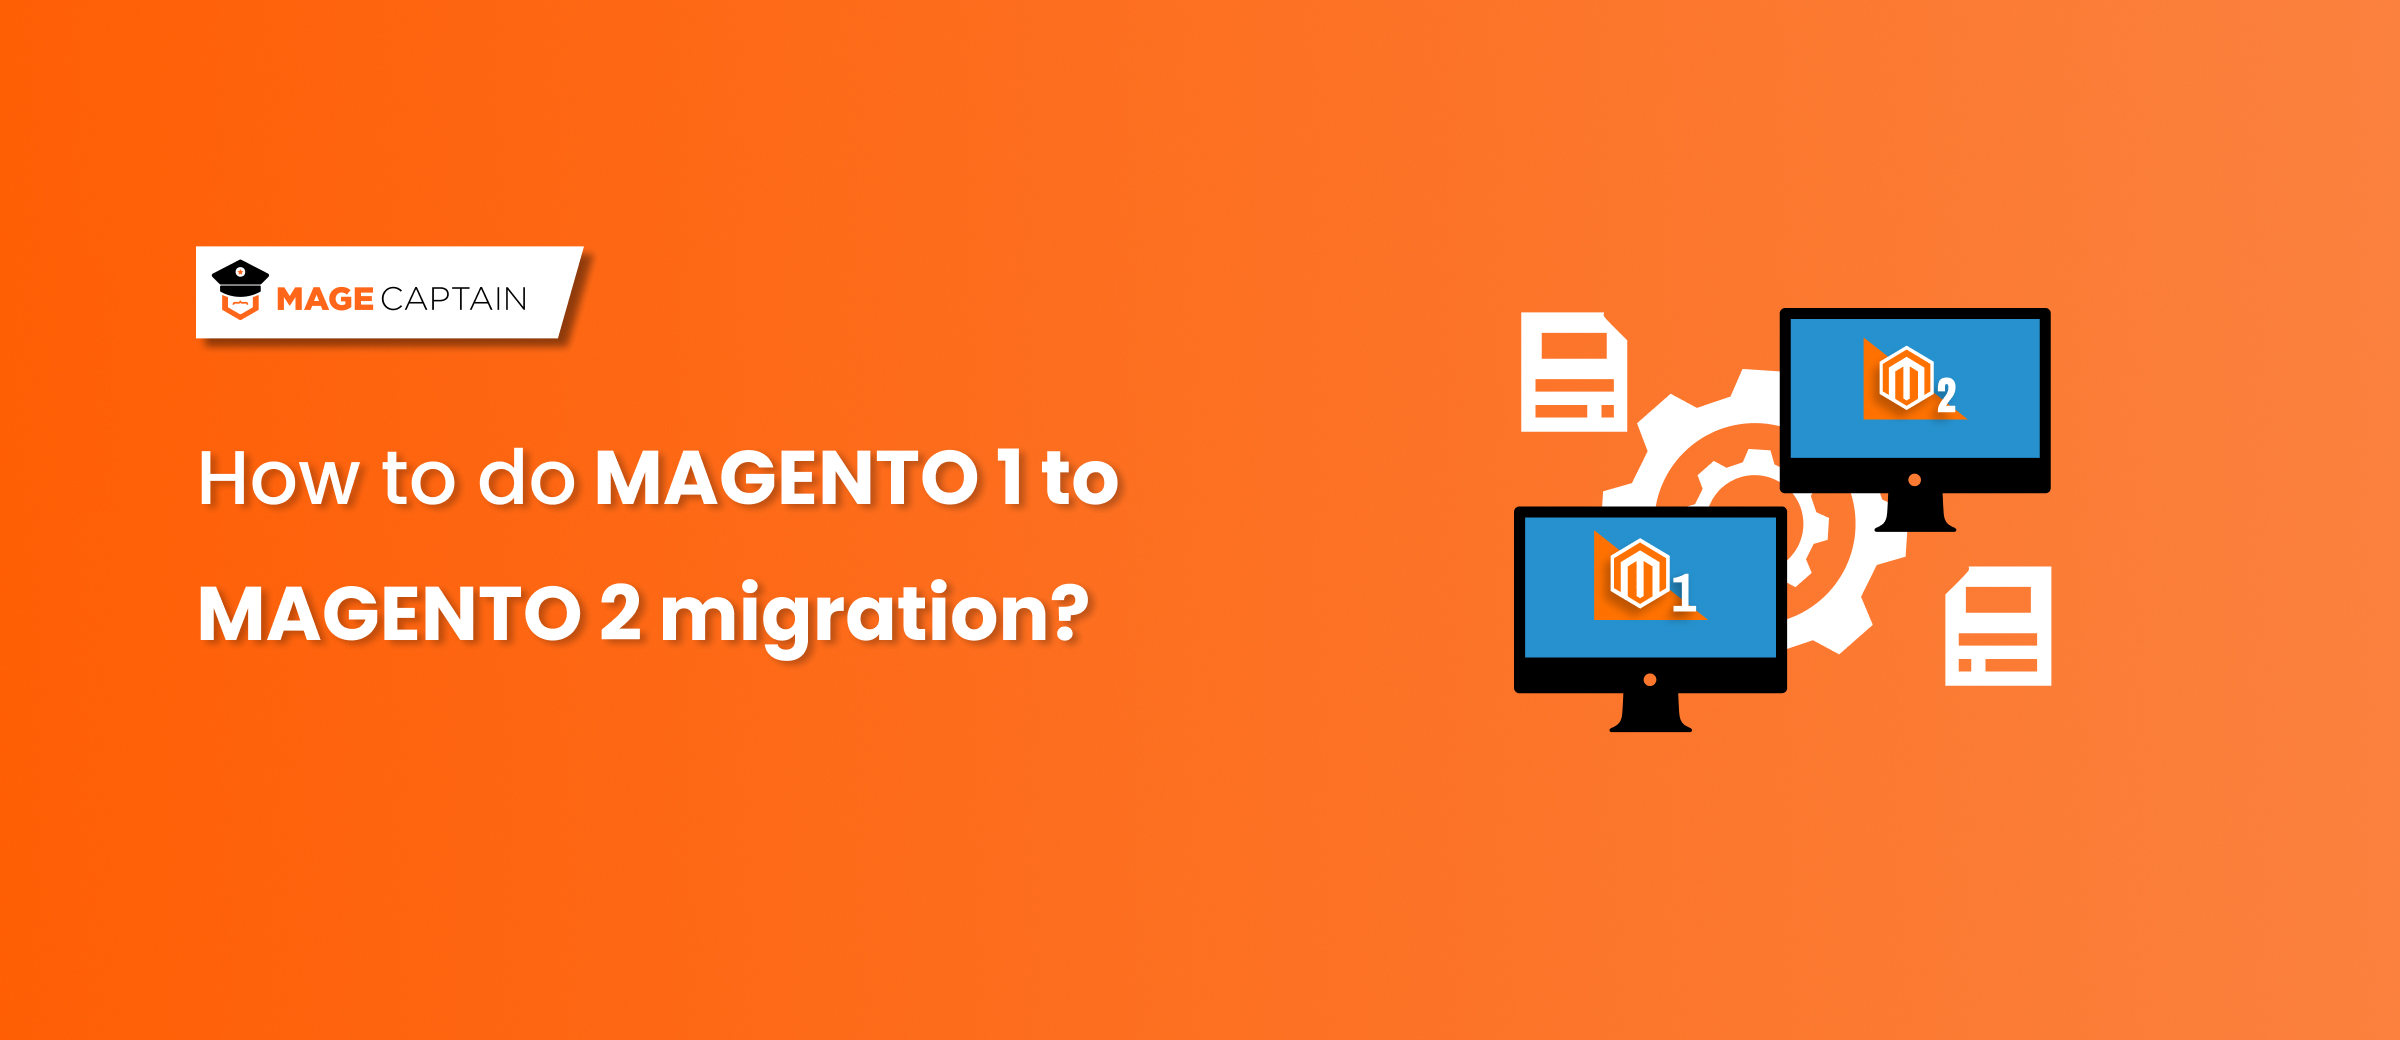 Magento 1 to Magento 2 migration in best possible ways